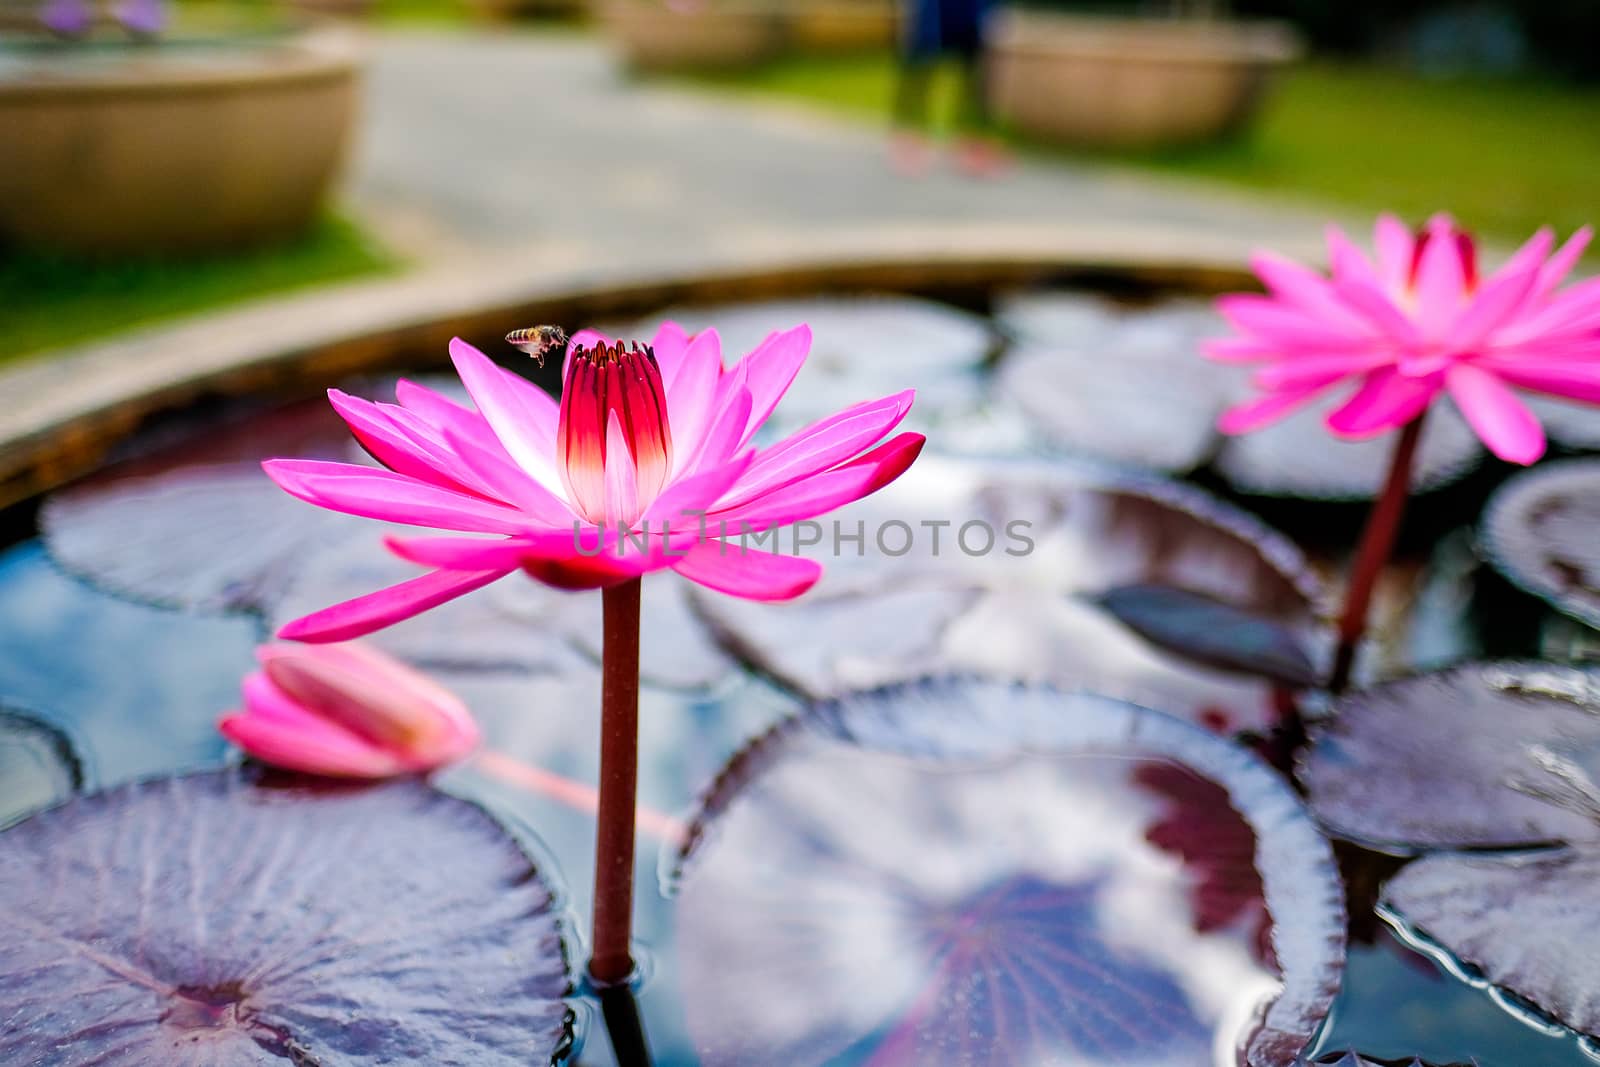 a bee enjoying its mid morning nectar of a pink lotus in an exhibit pond in a botanical garden